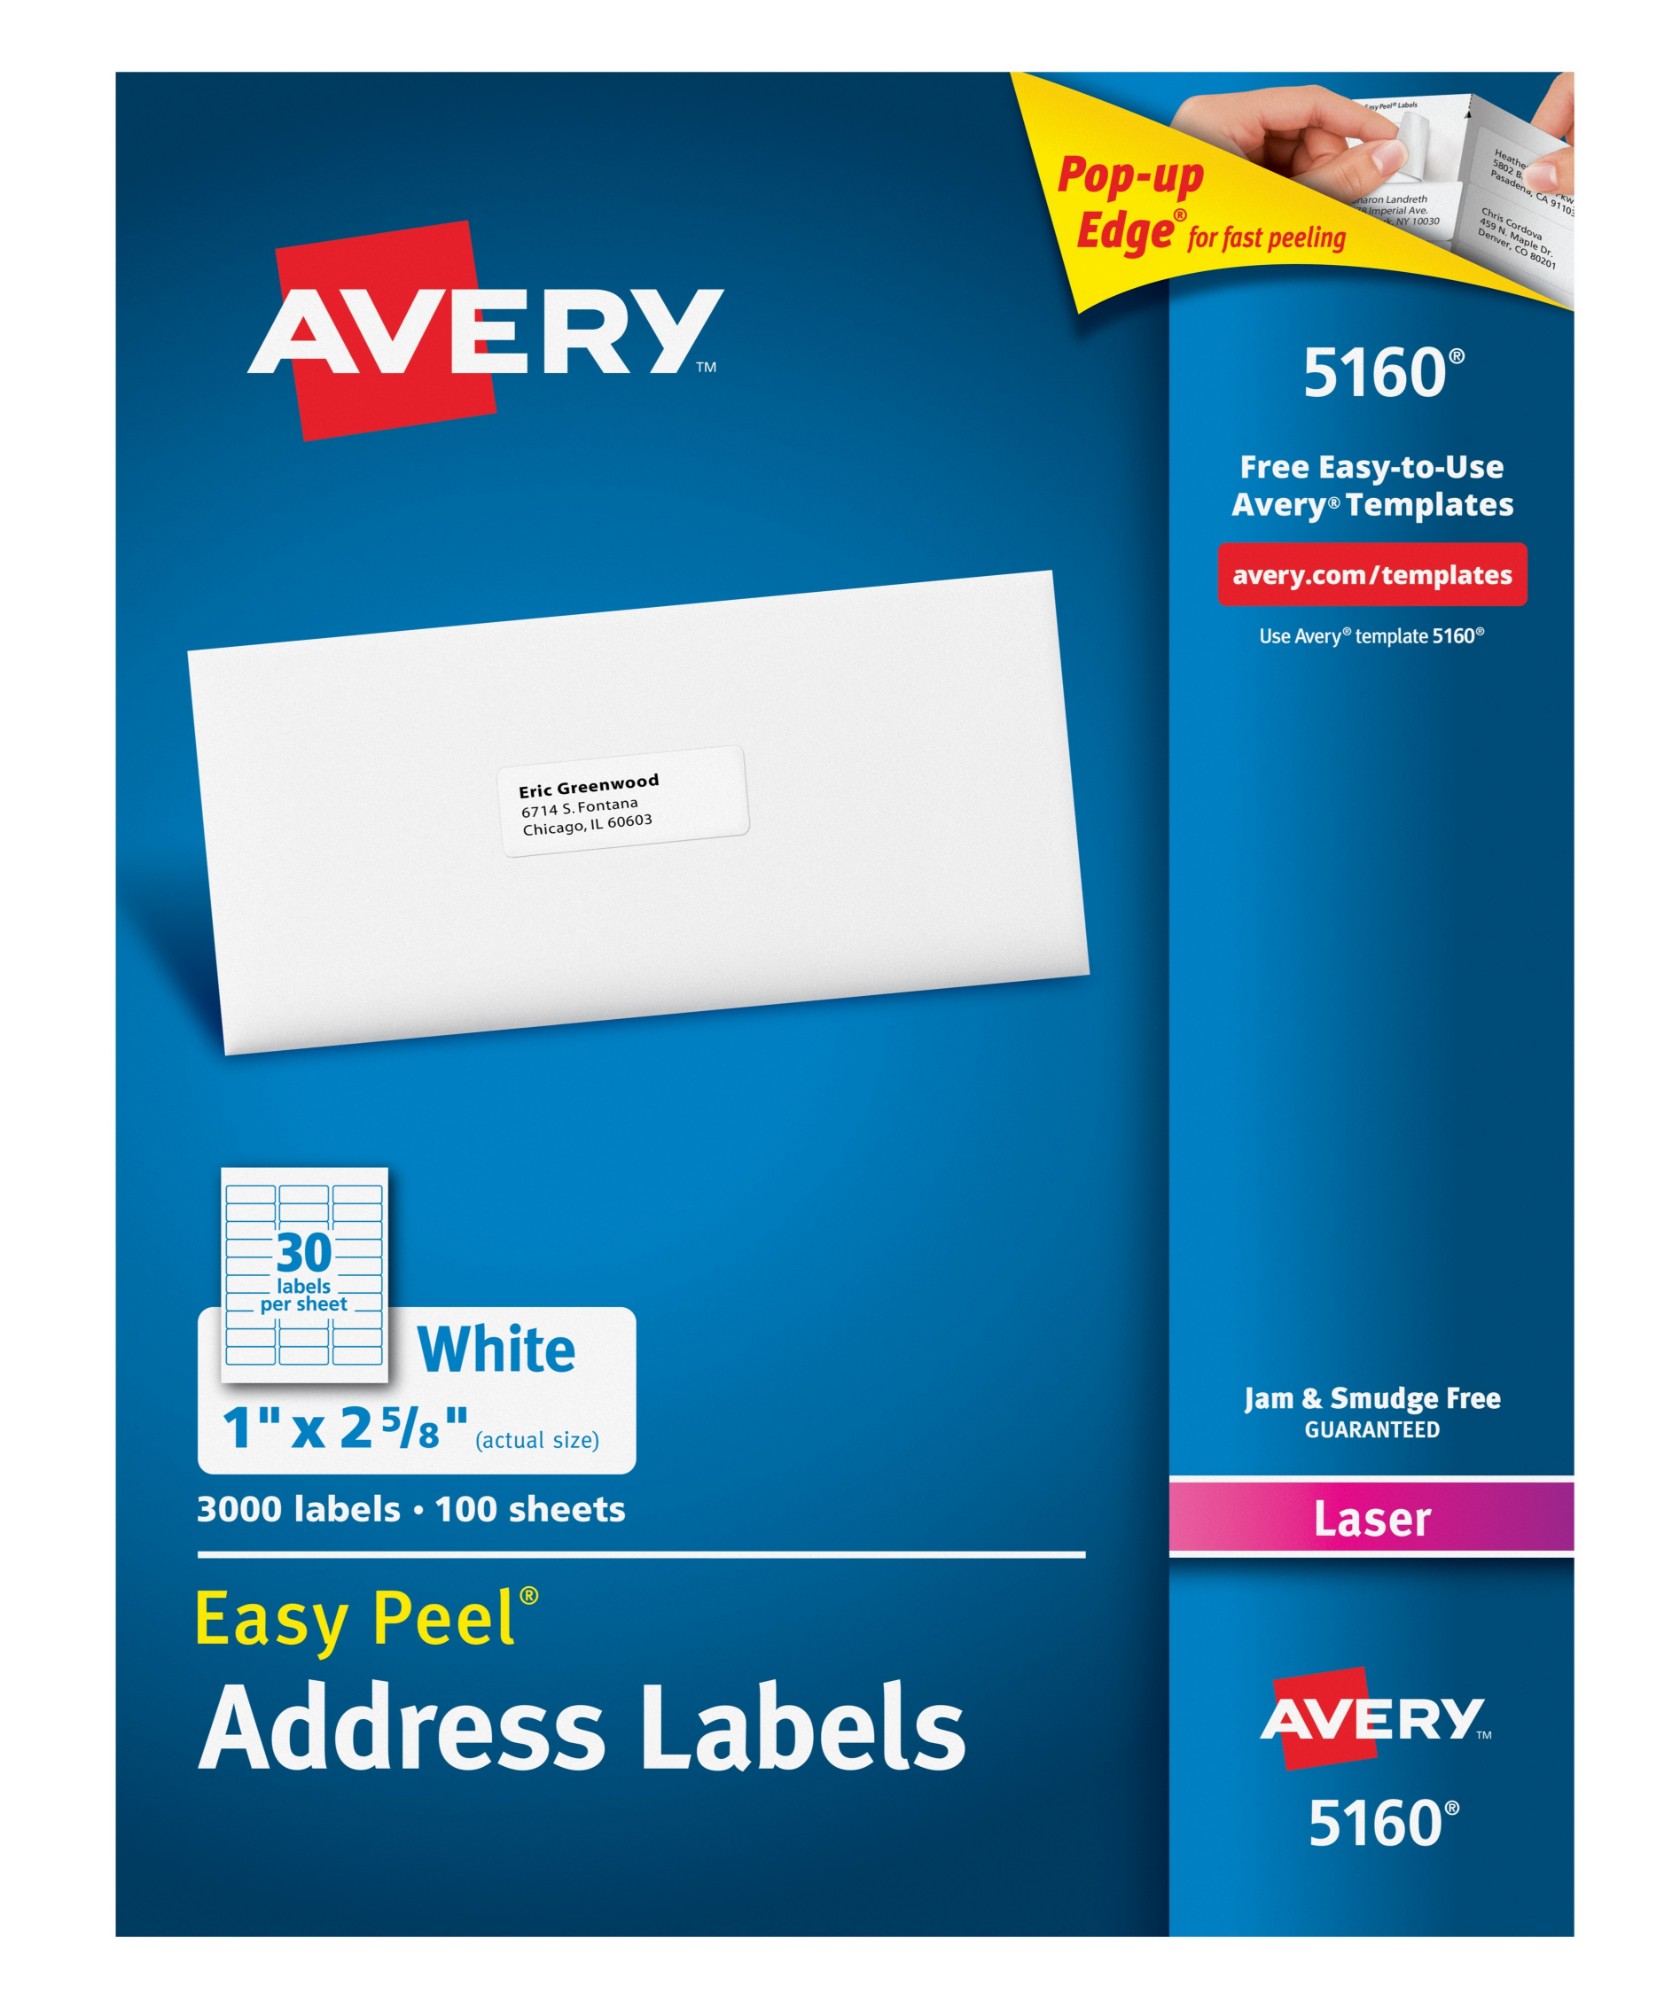 microsoft word how to set avery 5160 address label template